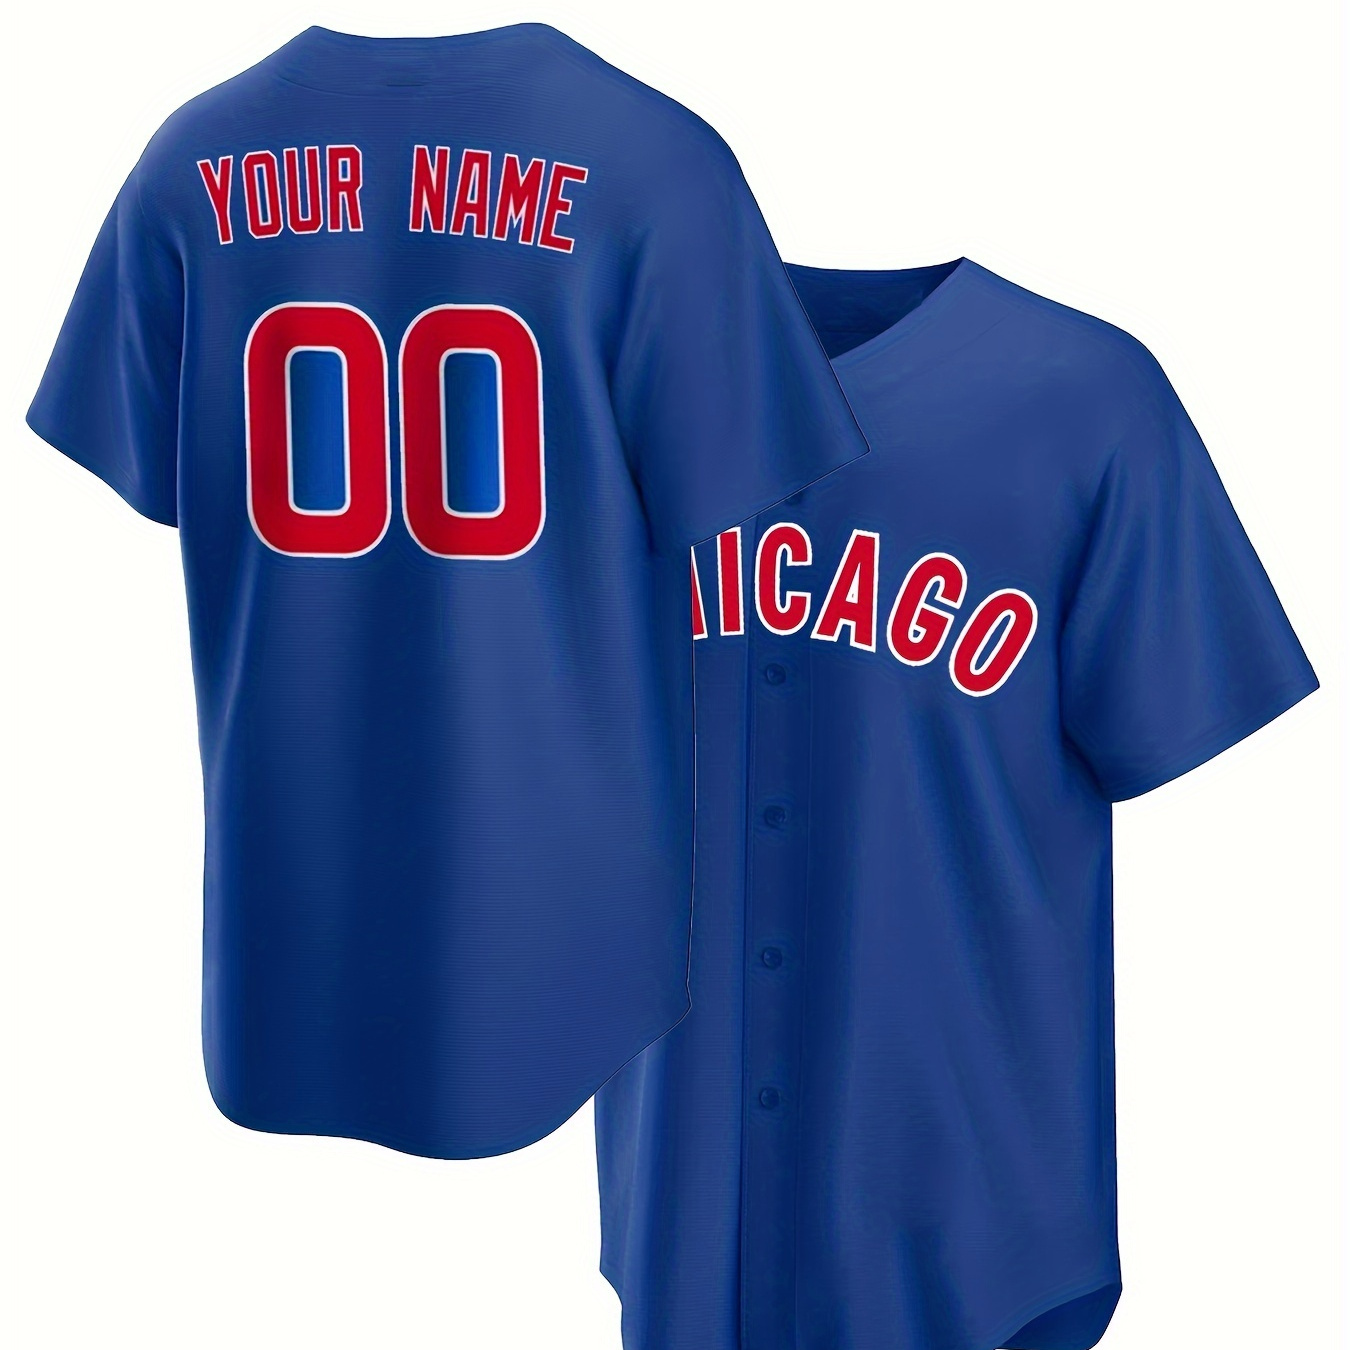 

Customized Name And Number, Chicago Embroidery Men's Baseball Jersey, Short Sleeve Button Up Sport Tops For Summer Training And Outdoors Wear